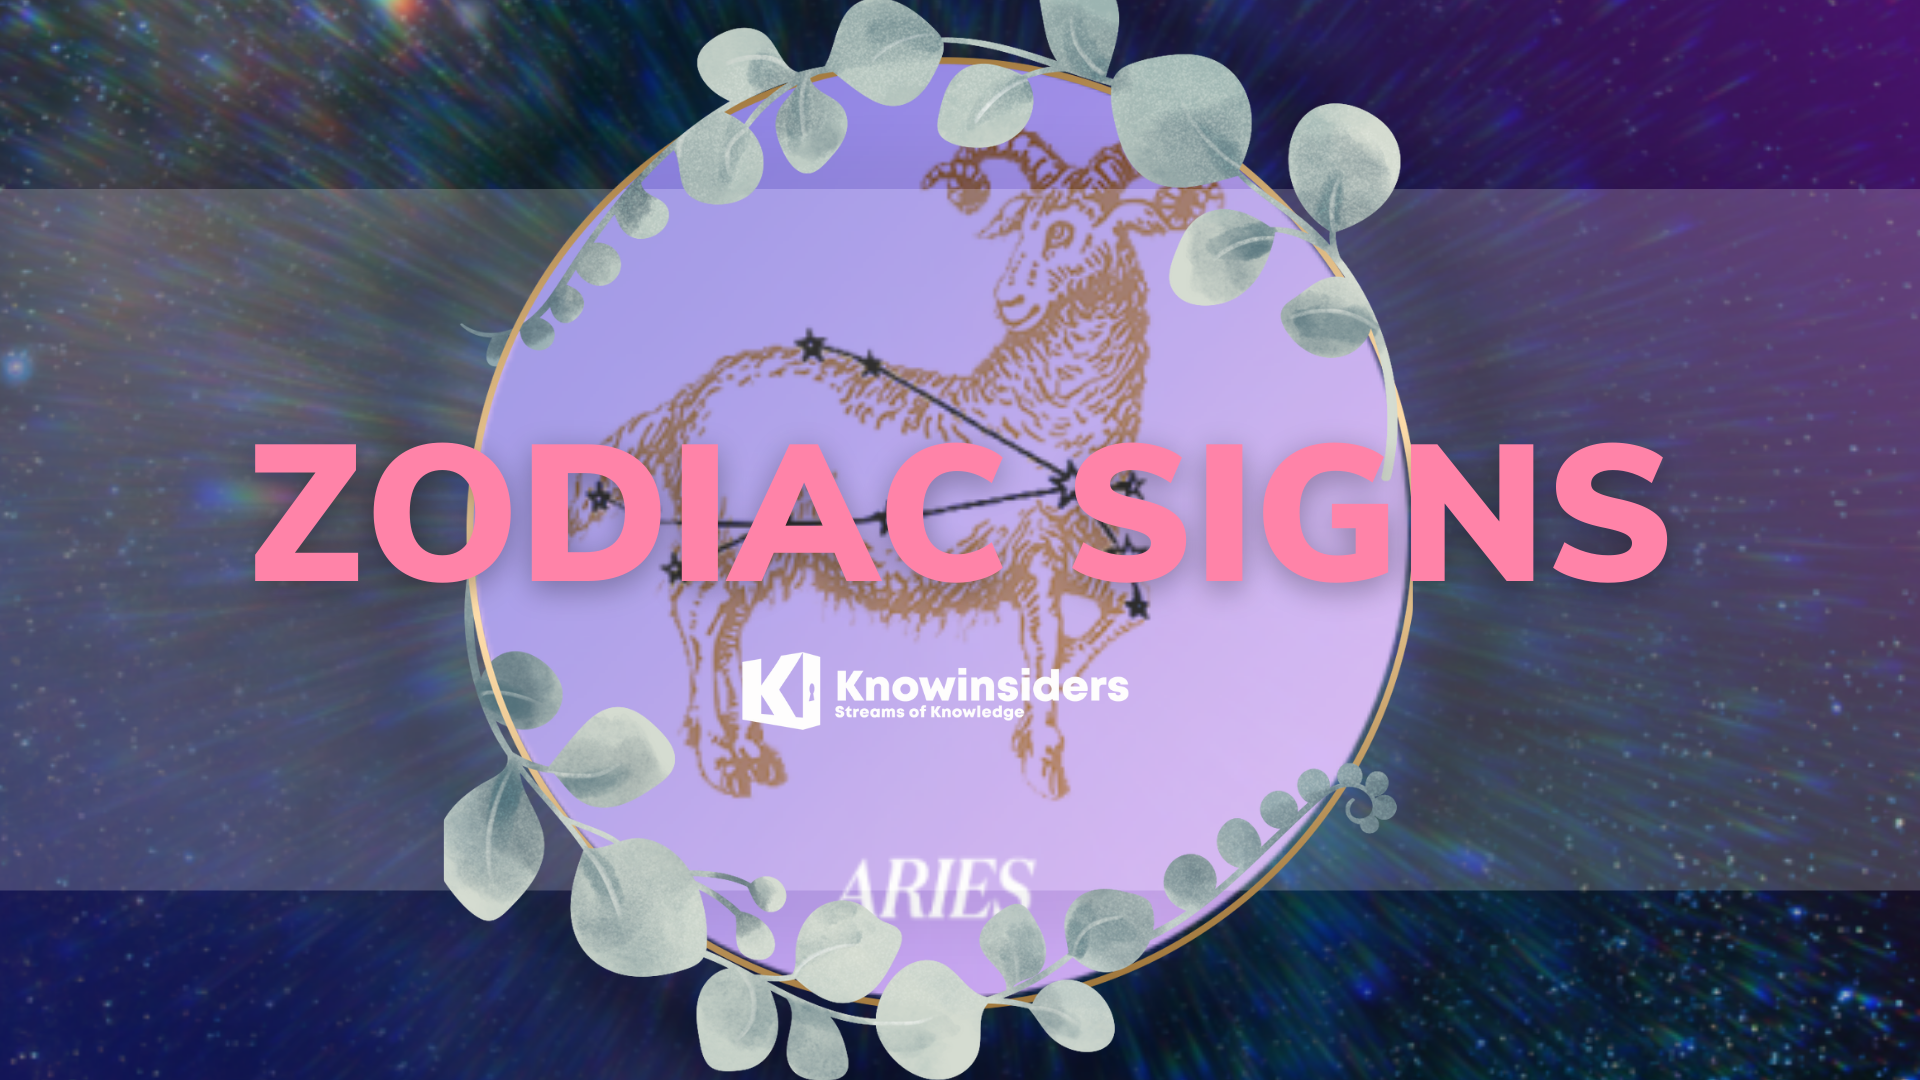 ARIES Zodiac Sign: Dates, Meaning and Personal Traits